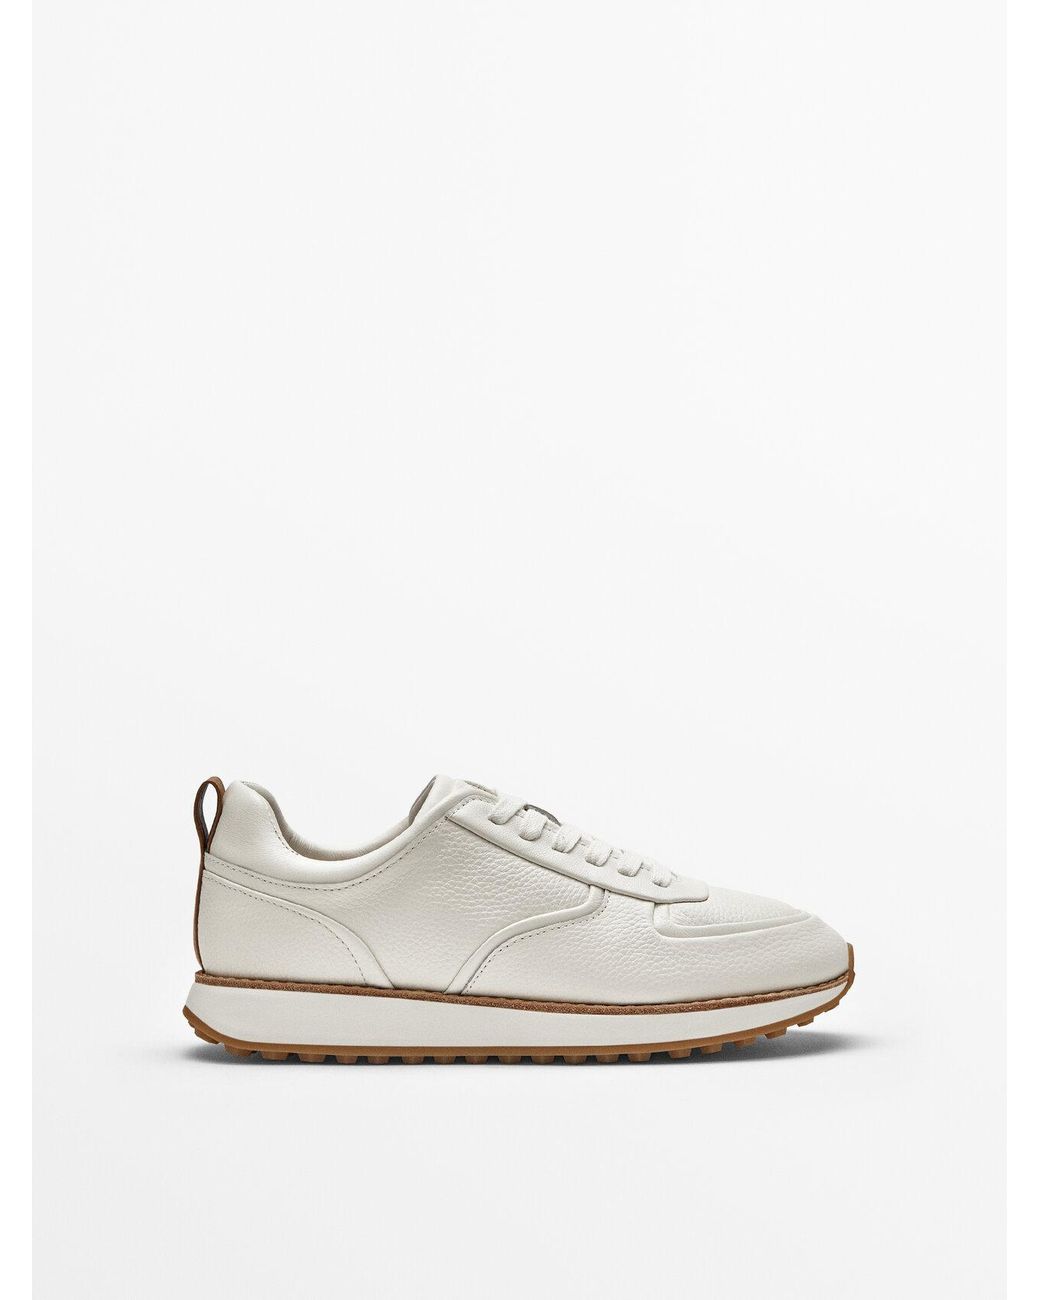 MASSIMO DUTTI Tumbled Leather Trainers in White | Lyst